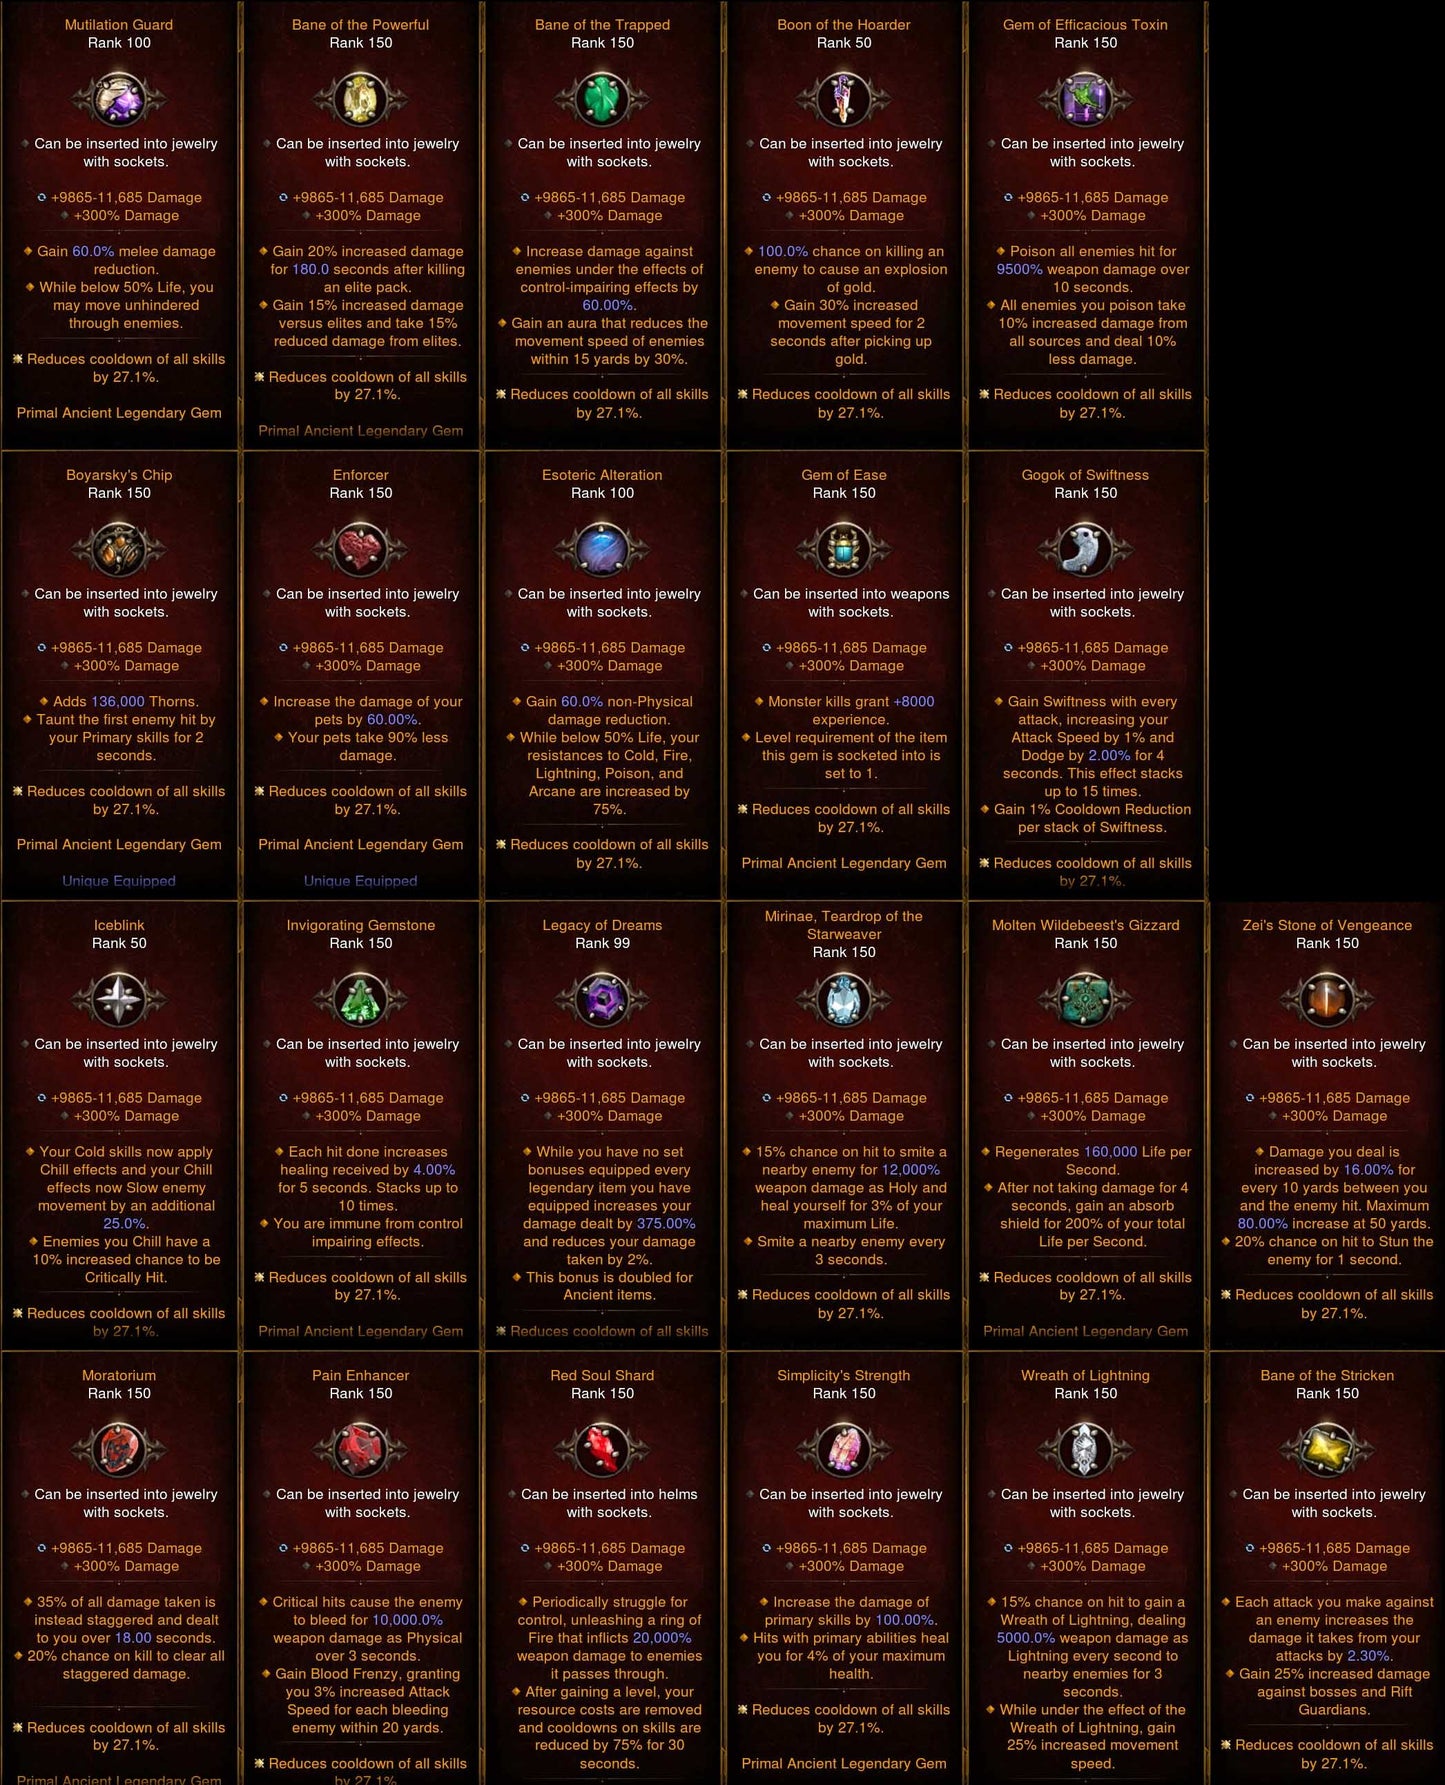 [Primal Ancient] [Quad DPS] [Ethereal-Infused] Legendary Gems (300% Damage, 27% CDR, 9k-11k Damage Diablo 3 Mods ROS Seasonal and Non Seasonal Save Mod - Modded Items and Gear - Hacks - Cheats - Trainers for Playstation 4 - Playstation 5 - Nintendo Switch - Xbox One